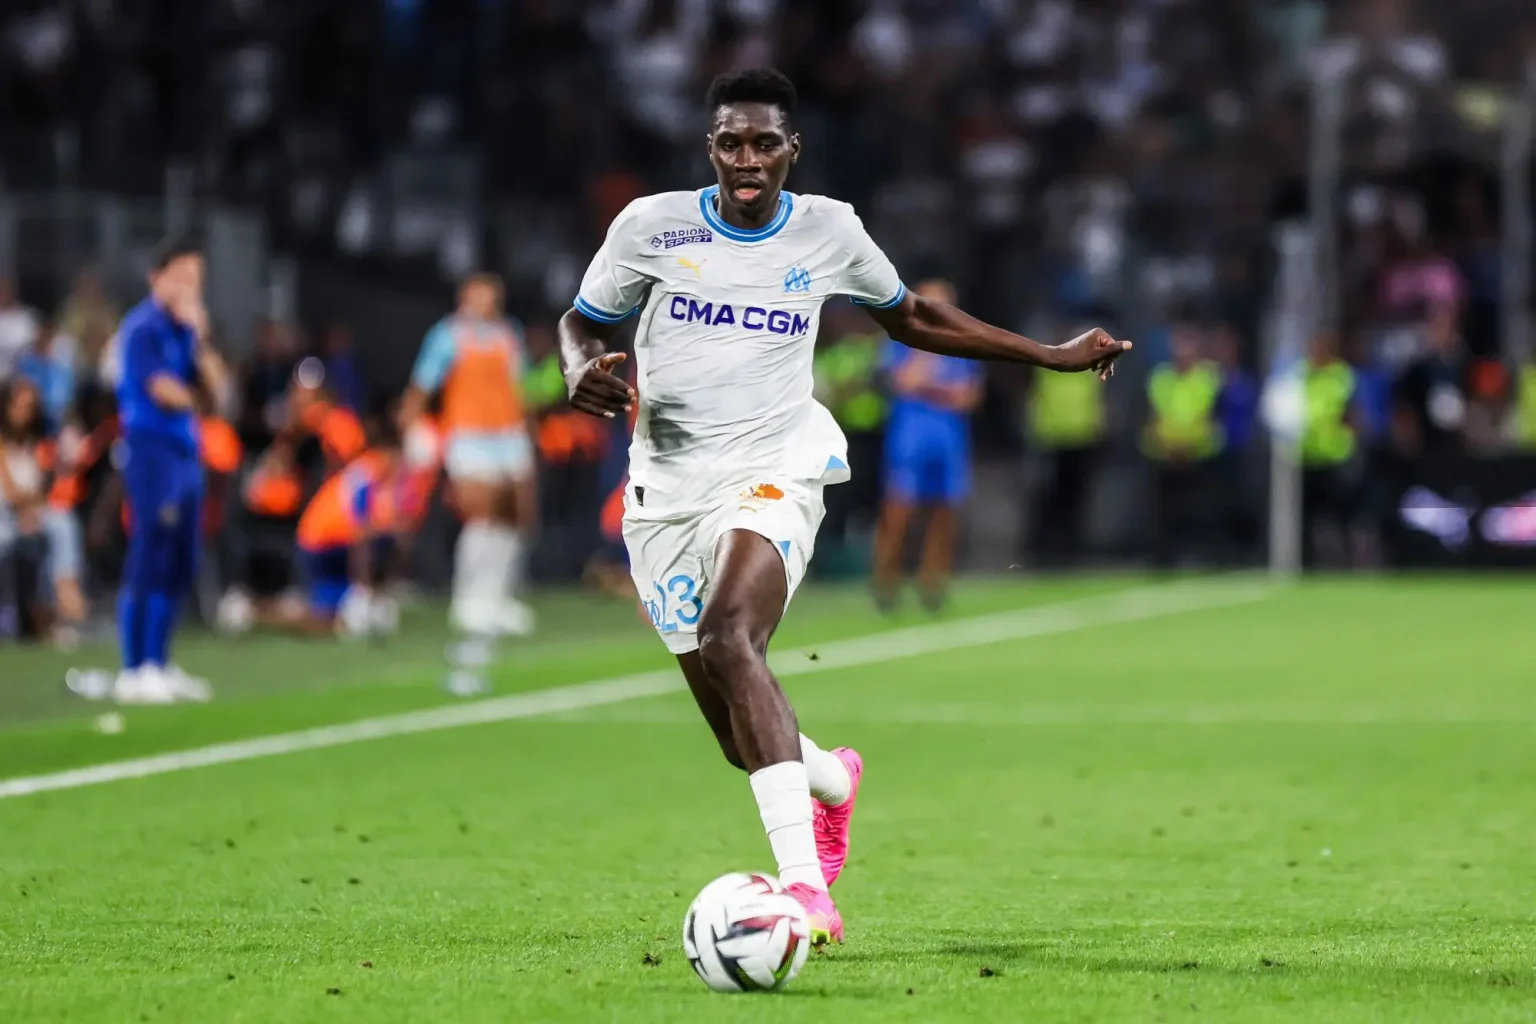 Ismaila Sarr set to transfer from Olympique de Marseille to Crystal Palace